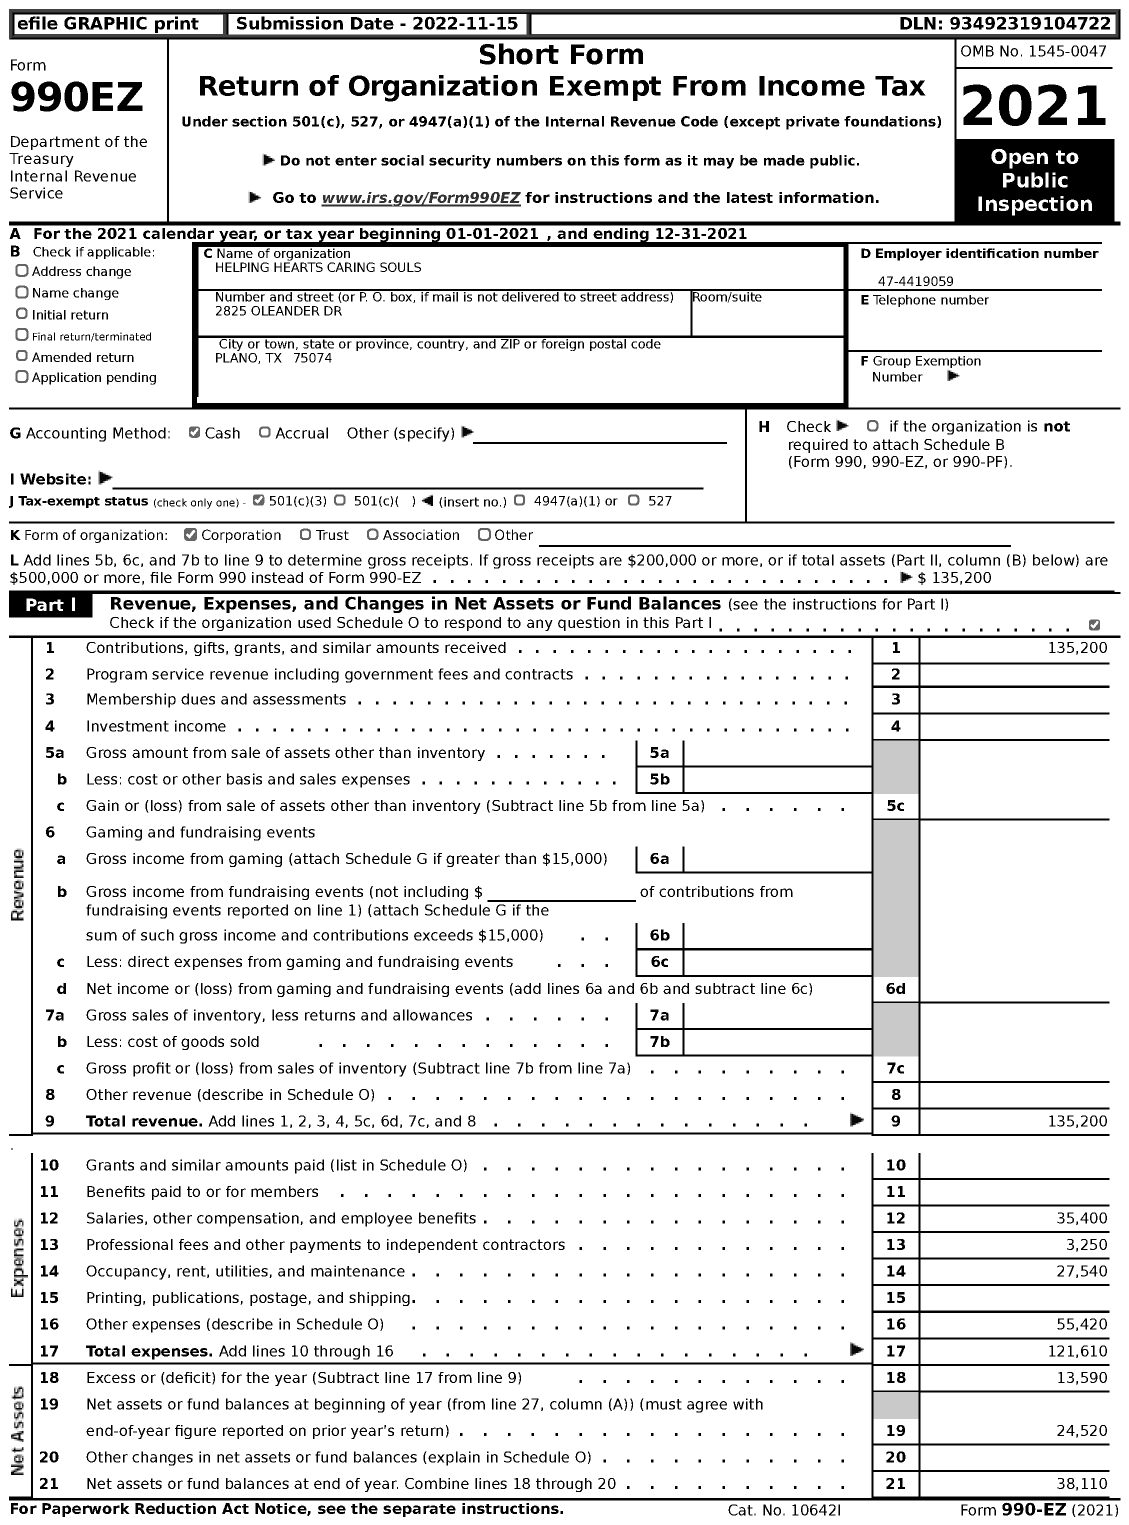 Image of first page of 2021 Form 990EZ for Helping Hearts Caring Souls